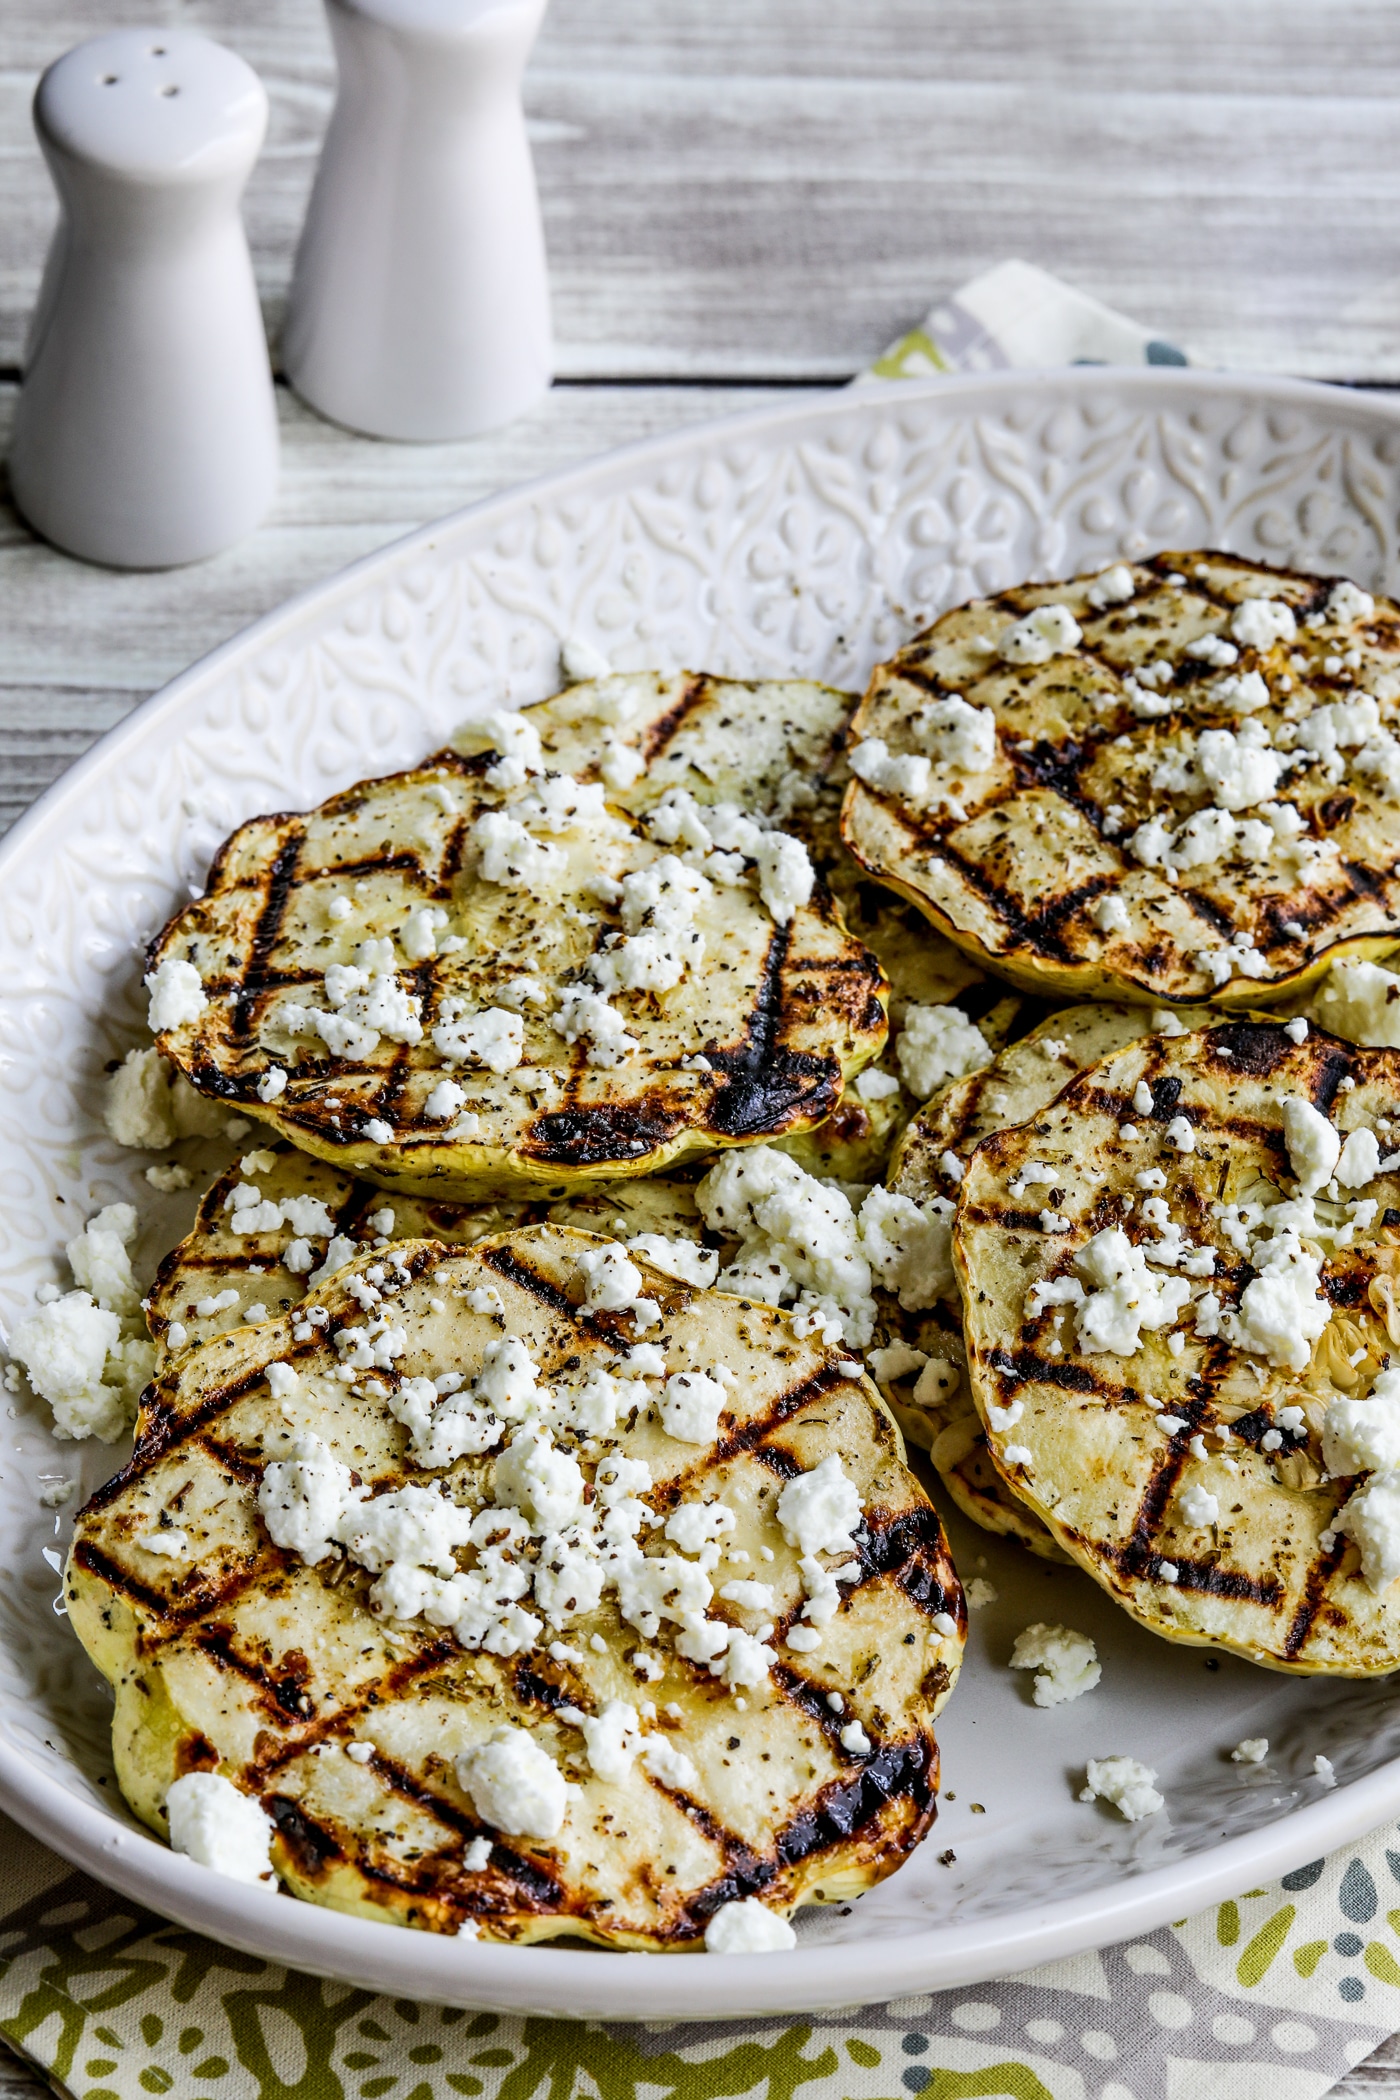 close-up photo of Grilled Patty Pan Squash in serving dish with crumbled goat cheese